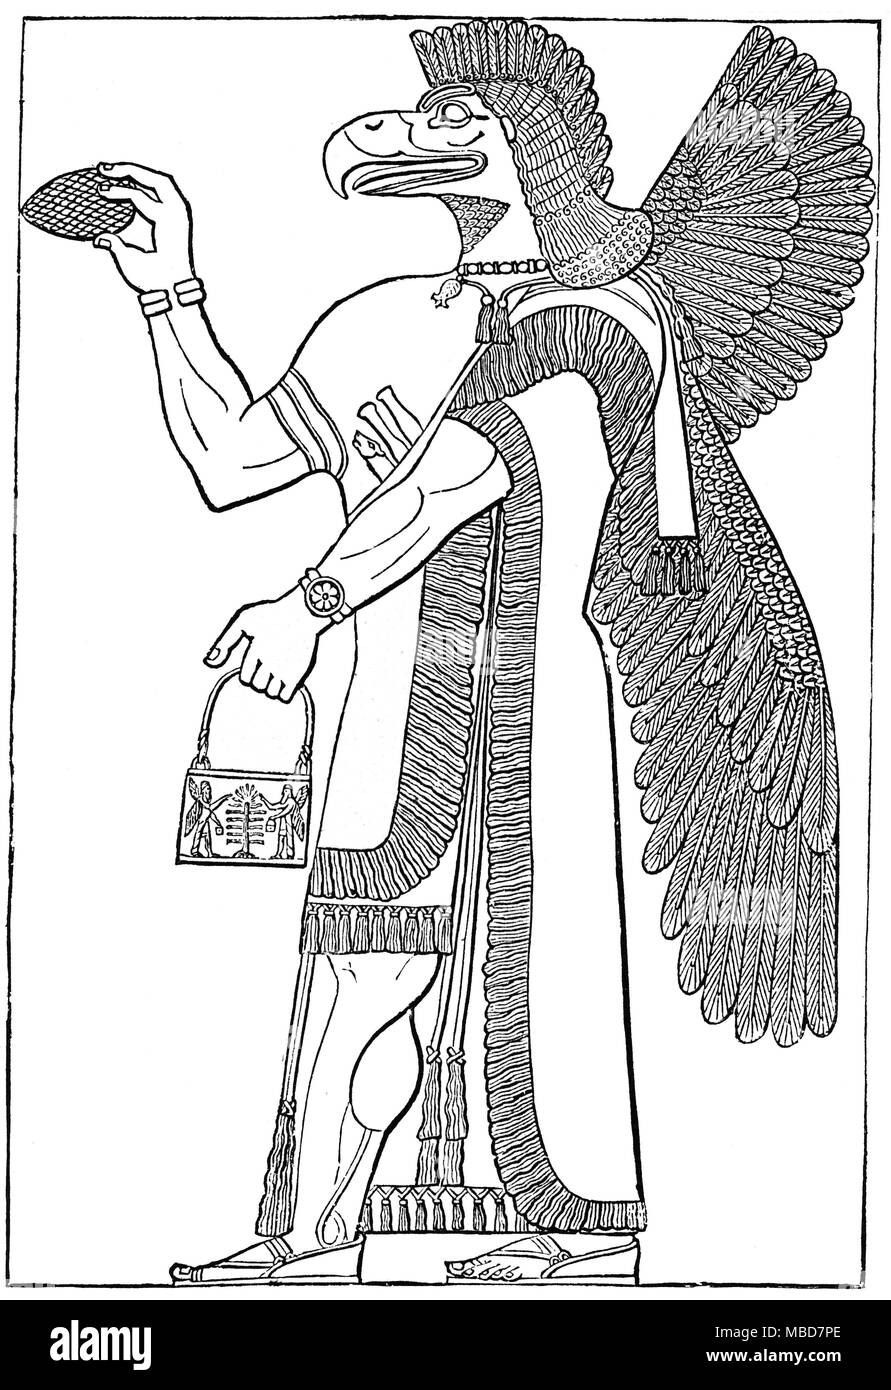 DEMONS - CHALDEAN Eagle-headed winged demon or god, standing before the Sacred Tree. From Zénaïde A. Ragozin, Chaldea from the Earliest Times to the Rise of Assyria,1889 Stock Photo